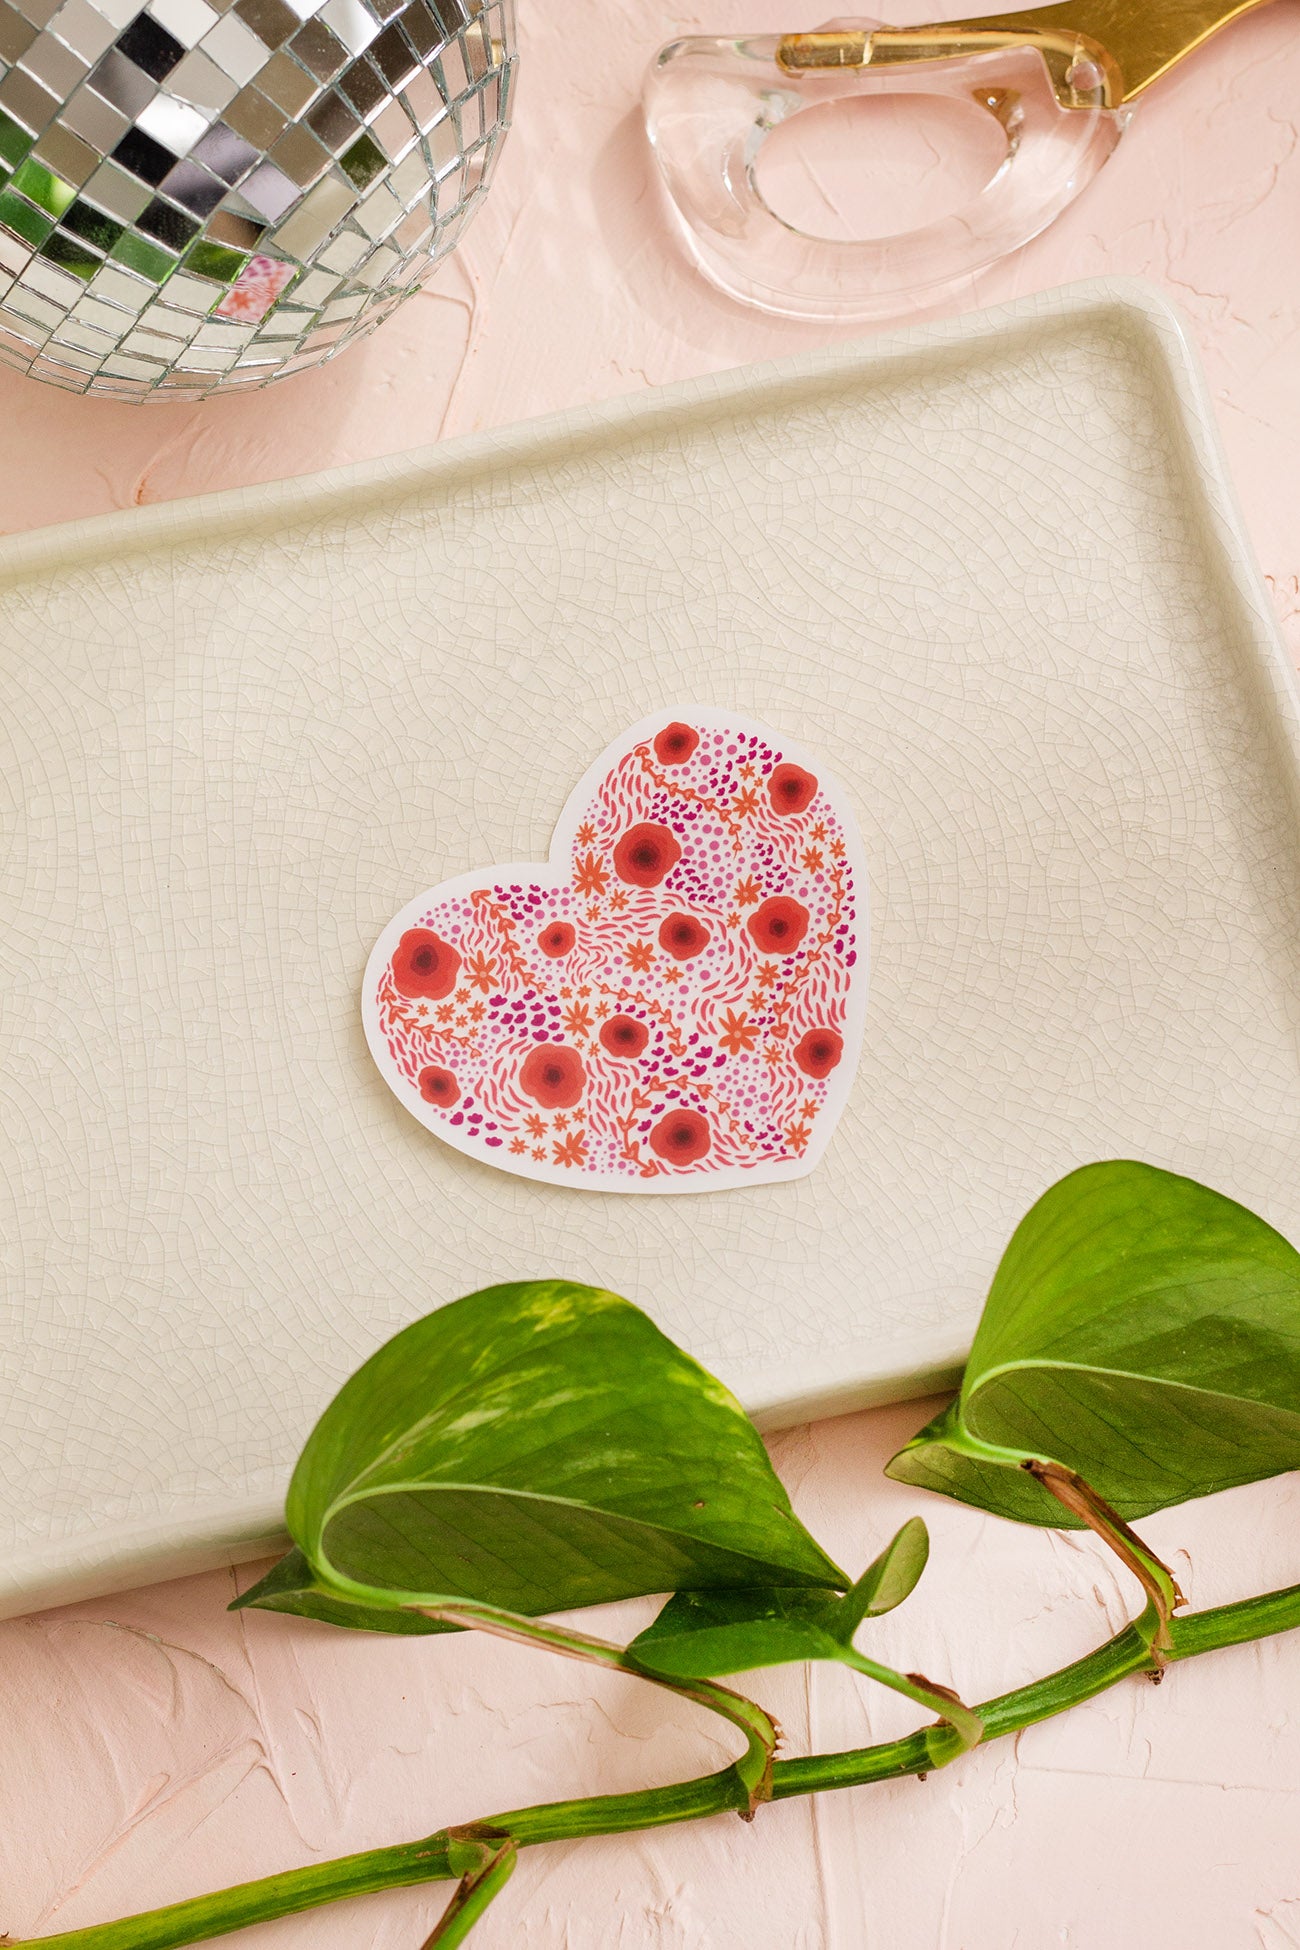 Clear Floral Heart Sticker